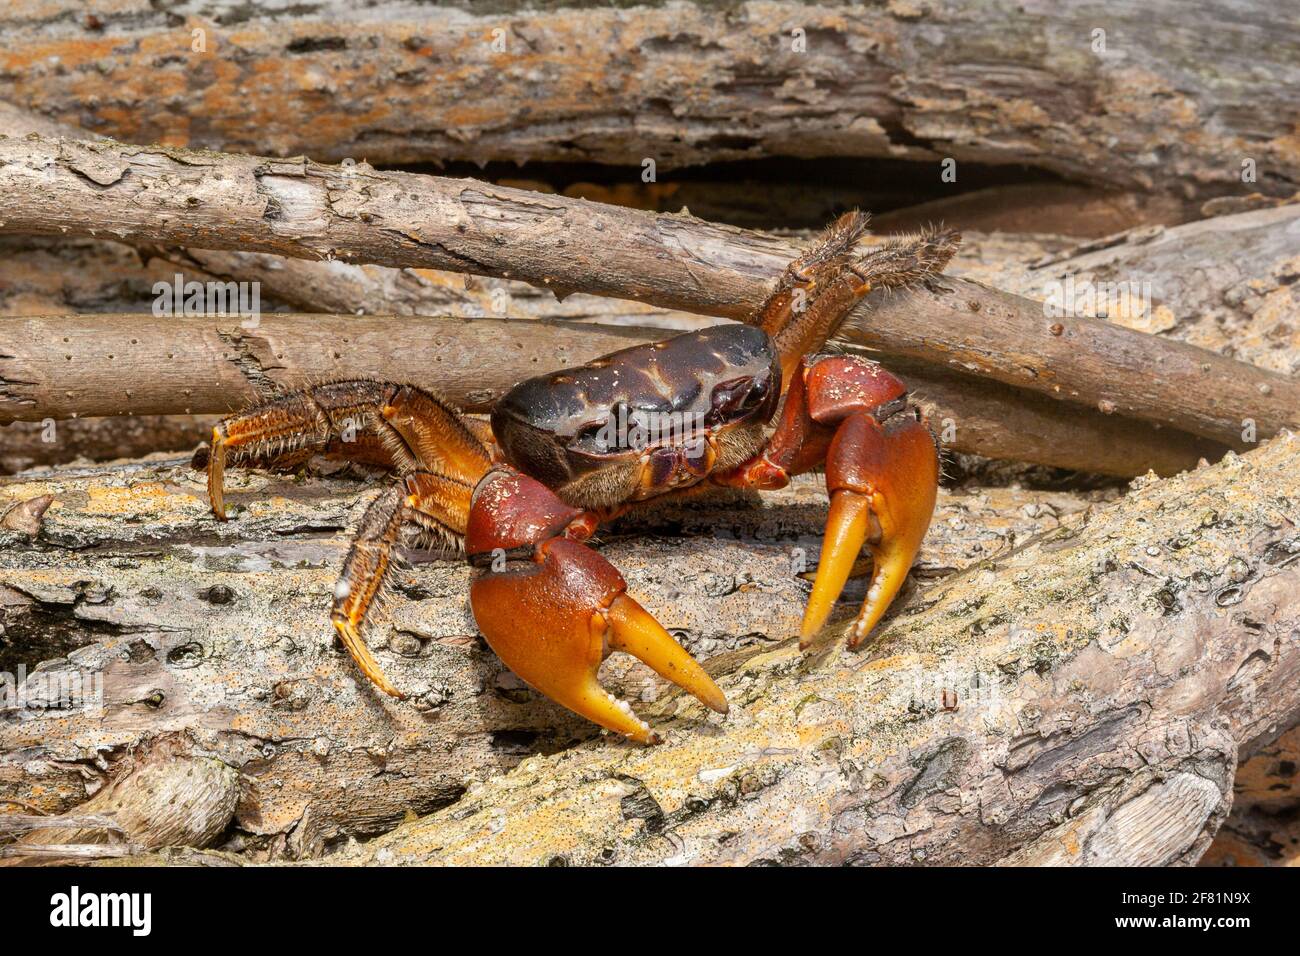 The brown land crab, Cardisoma carnifex, is also known as a chestnut crab or red-claw crab, Fiji. This crab is a species of terrestrial crab found in Stock Photo